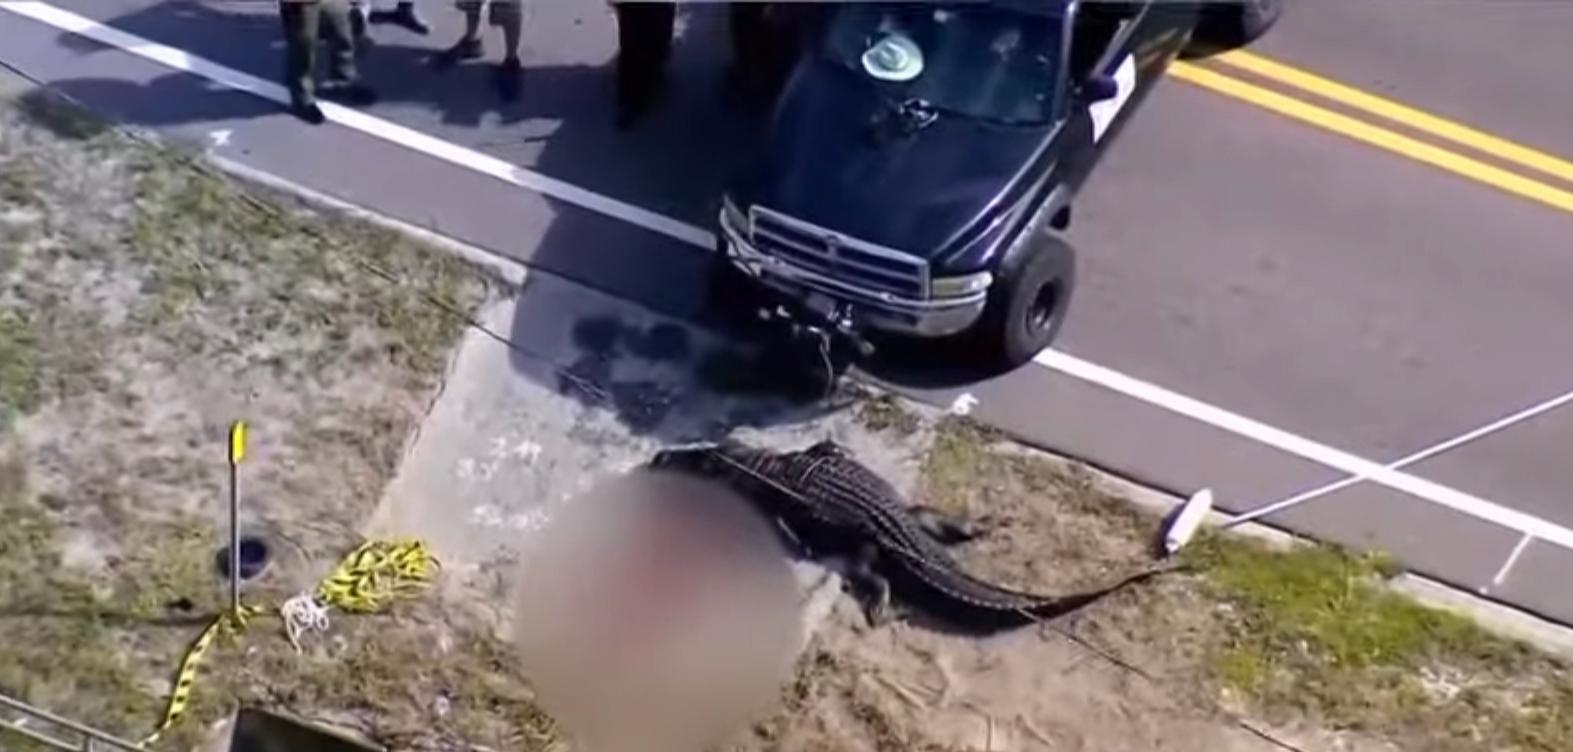 Alligator with human remains in Flordia